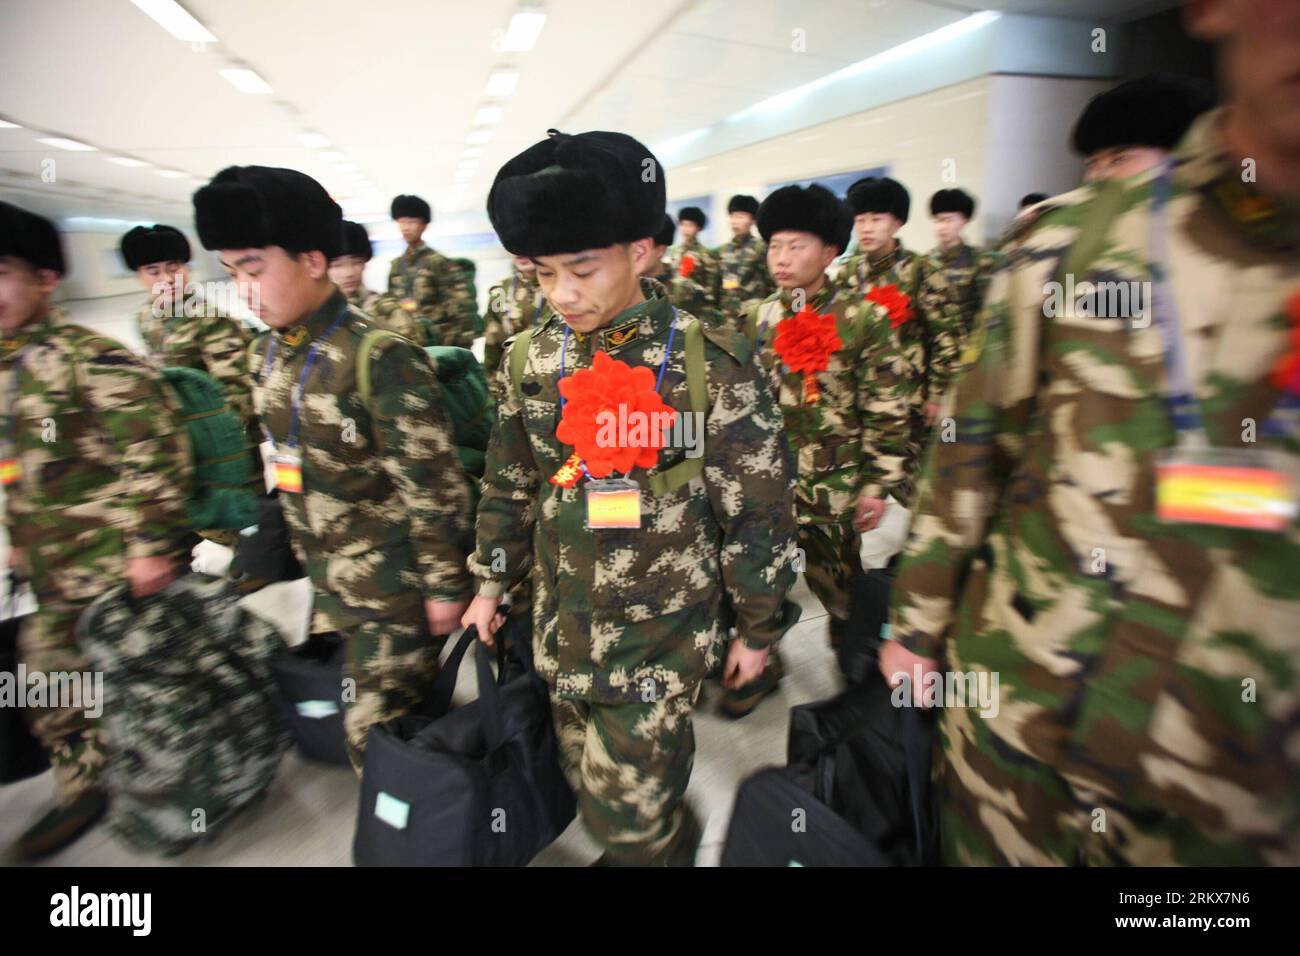 Bildnummer: 58910615  Datum: 12.12.2012  Copyright: imago/Xinhua (121212) -- HOHHOT, Dec. 12, 2012 (Xinhua) -- Newly recruited para-military policemen get off a train at a railway station in Hohhot, north China s Inner Mongolia Autonomous Region, Dec. 12, 2012. Newly recruited soldiers of People s Liberation Army (PLA) and para-military policemen joined their units around the country recently. (Xinhua/Zhang Fan) (zn) CHINA-HOHHOT-MILITARY-NEW RECUITS (CN) PUBLICATIONxNOTxINxCHN Gesellschaft Militär Rekruten Einberufung x0x xac 2012 quer      58910615 Date 12 12 2012 Copyright Imago XINHUA  Hoh Stock Photo